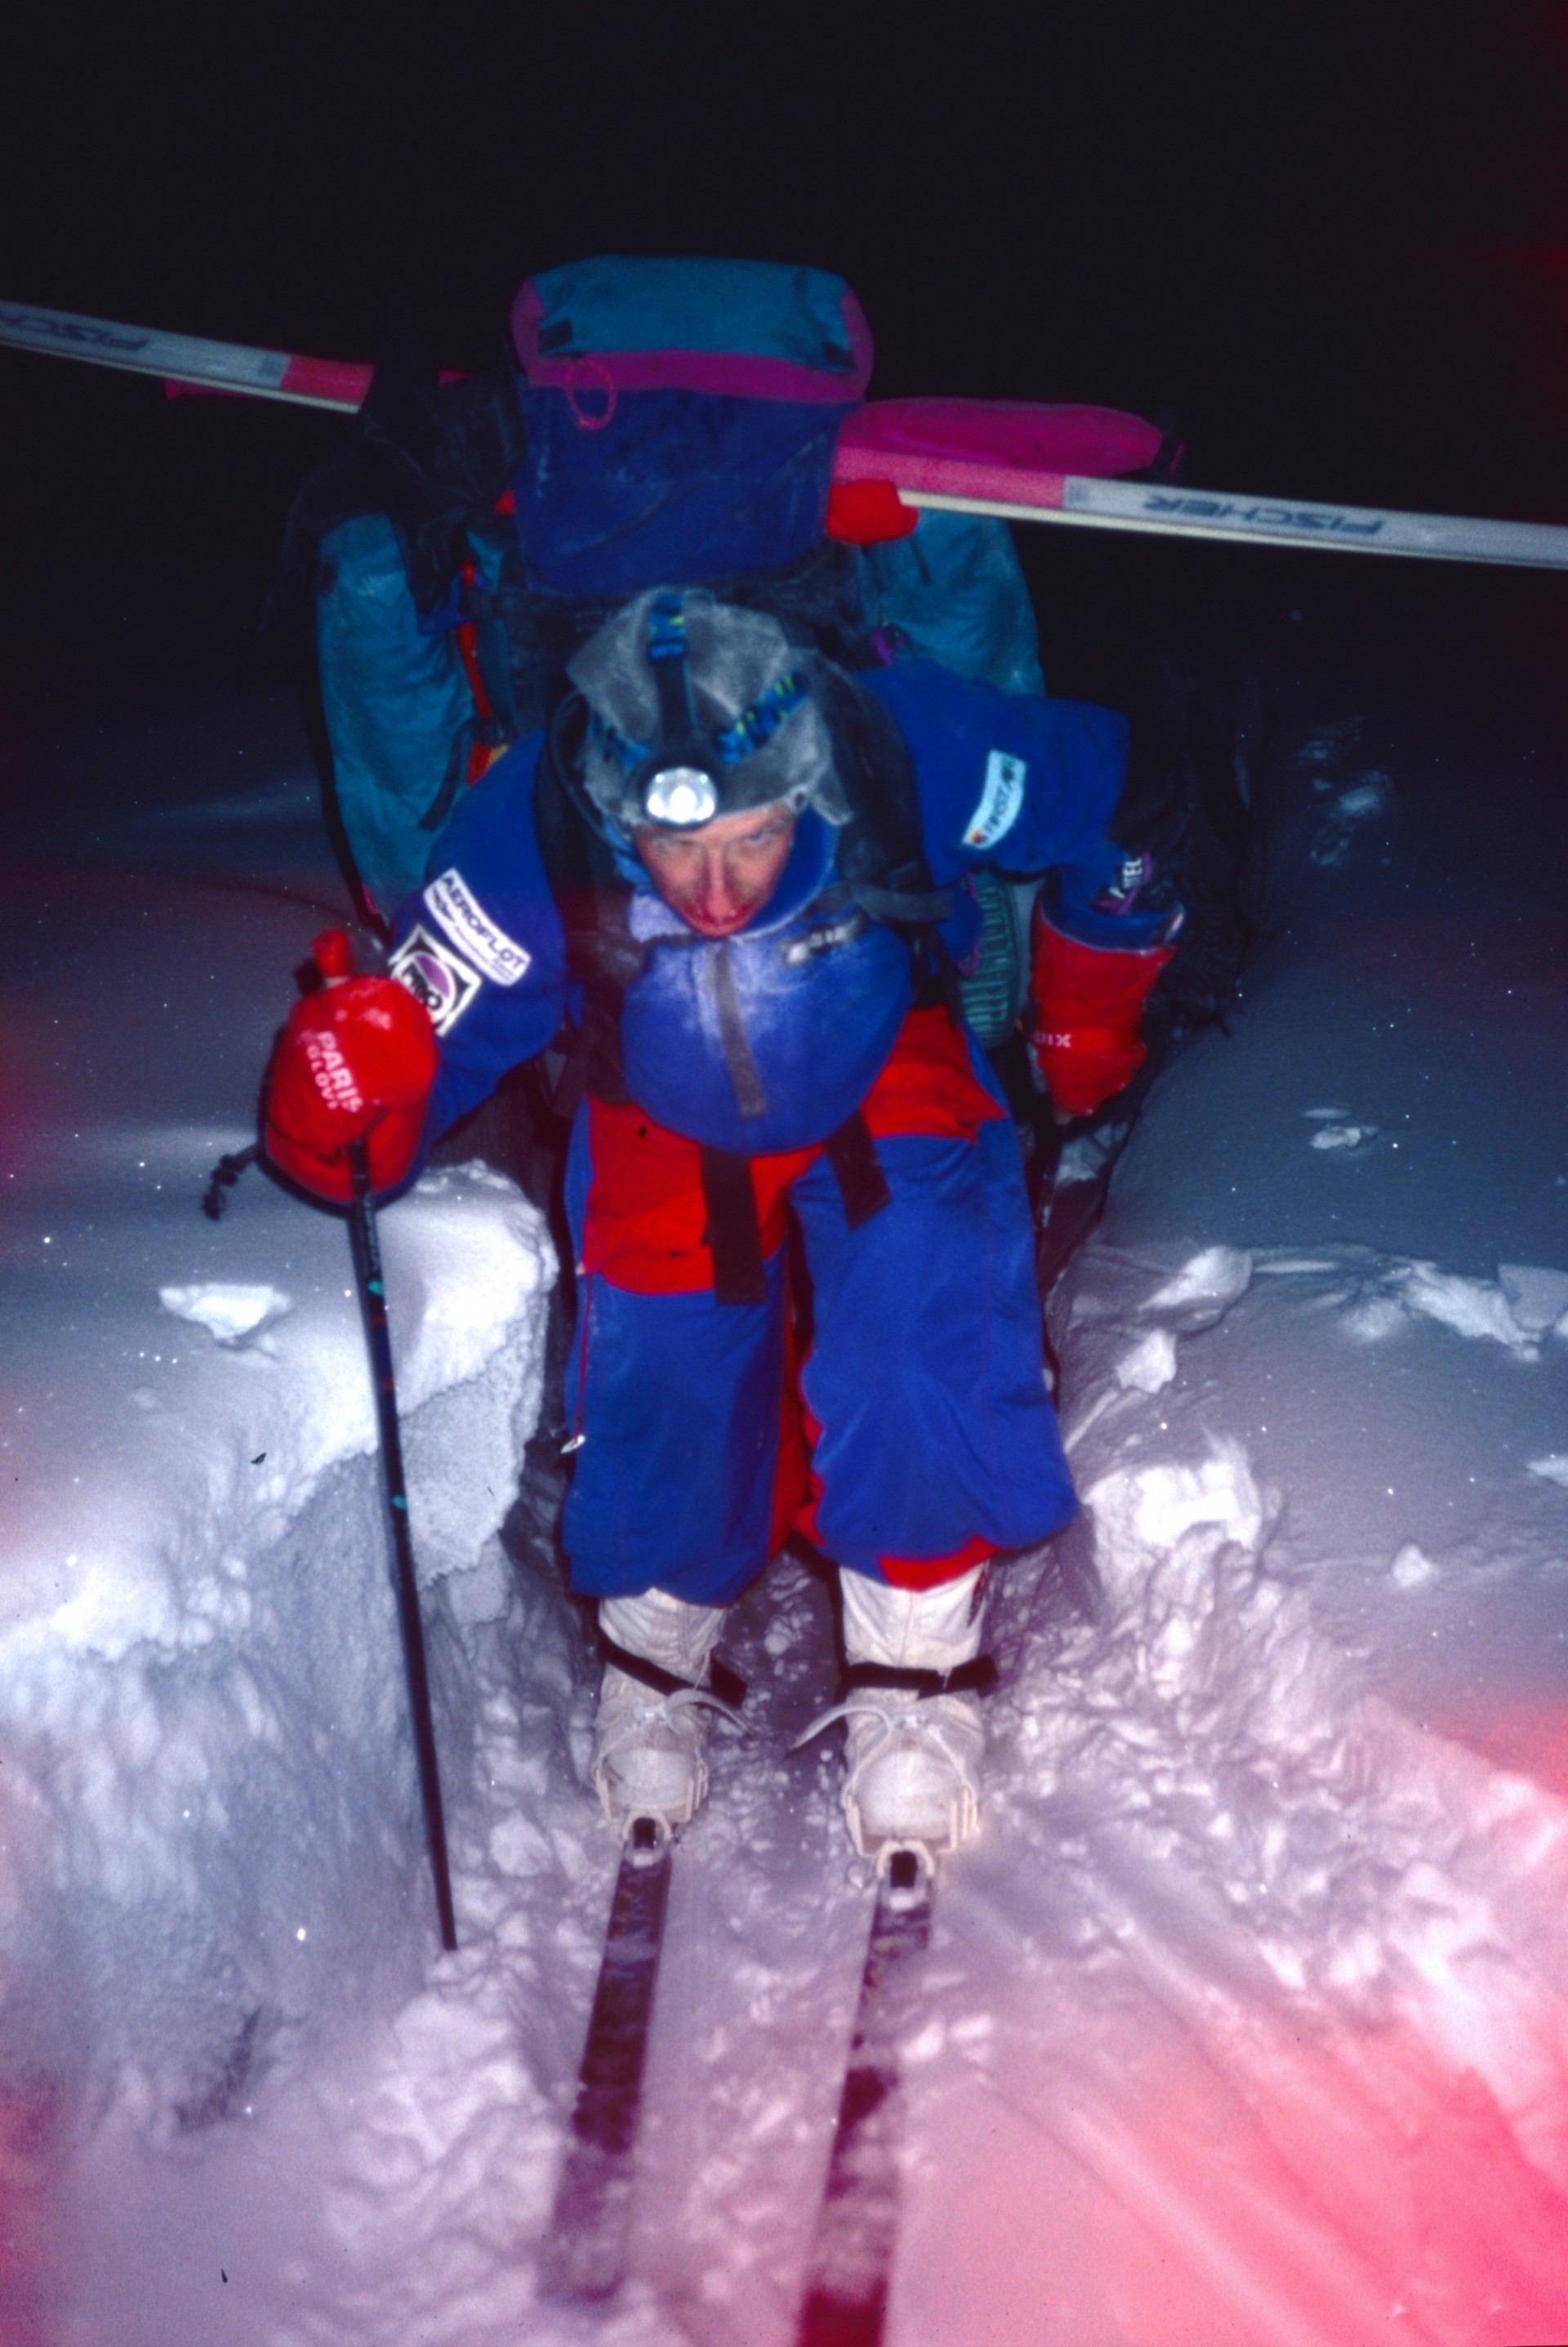 Hard at work: Richard pulling supplies over rough ice at -60C